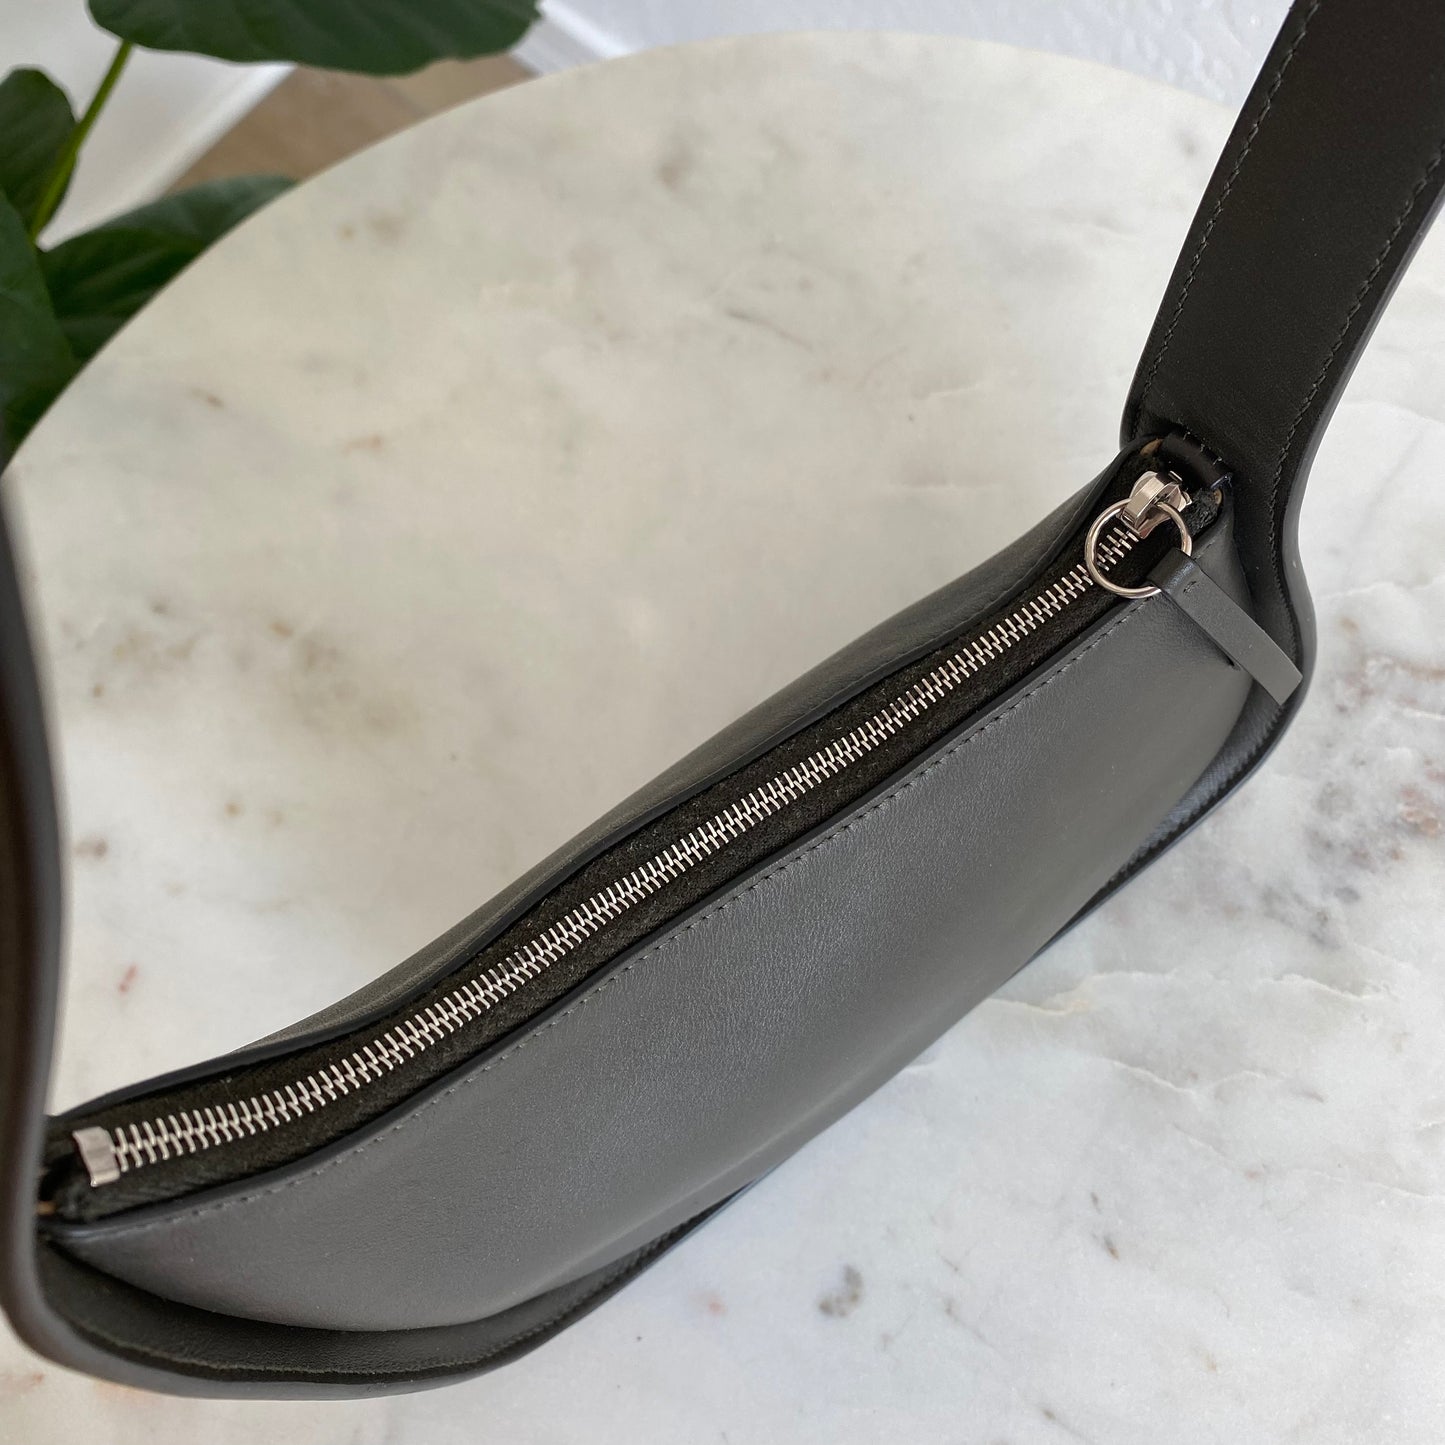 The Row Smooth Leather Half Moon Shoulder Bag